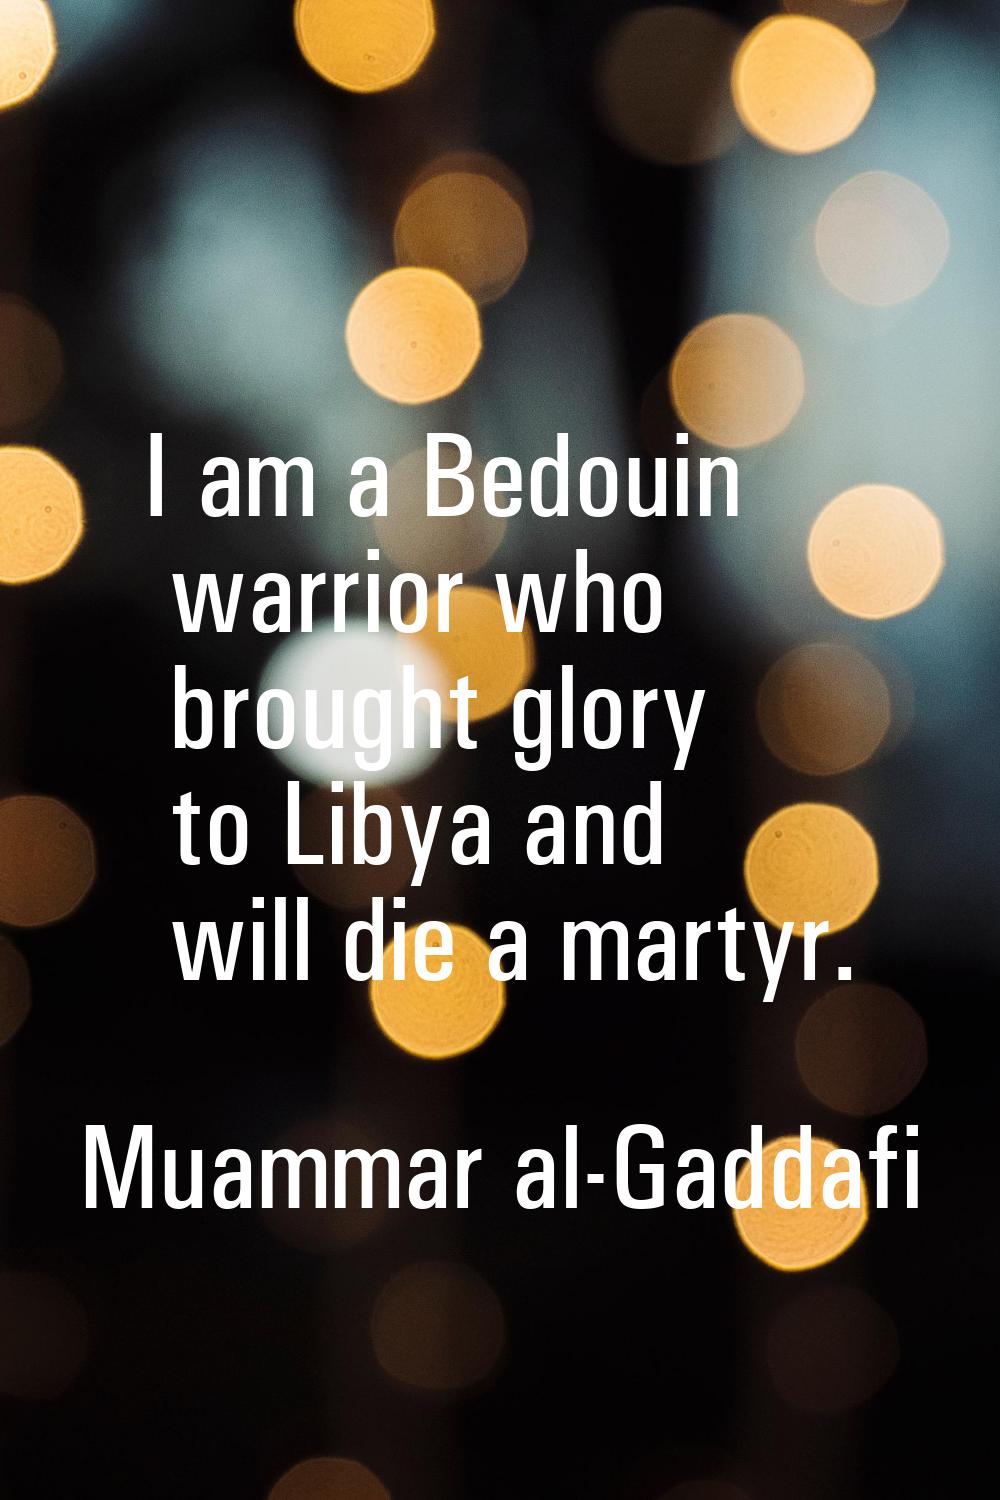 I am a Bedouin warrior who brought glory to Libya and will die a martyr.